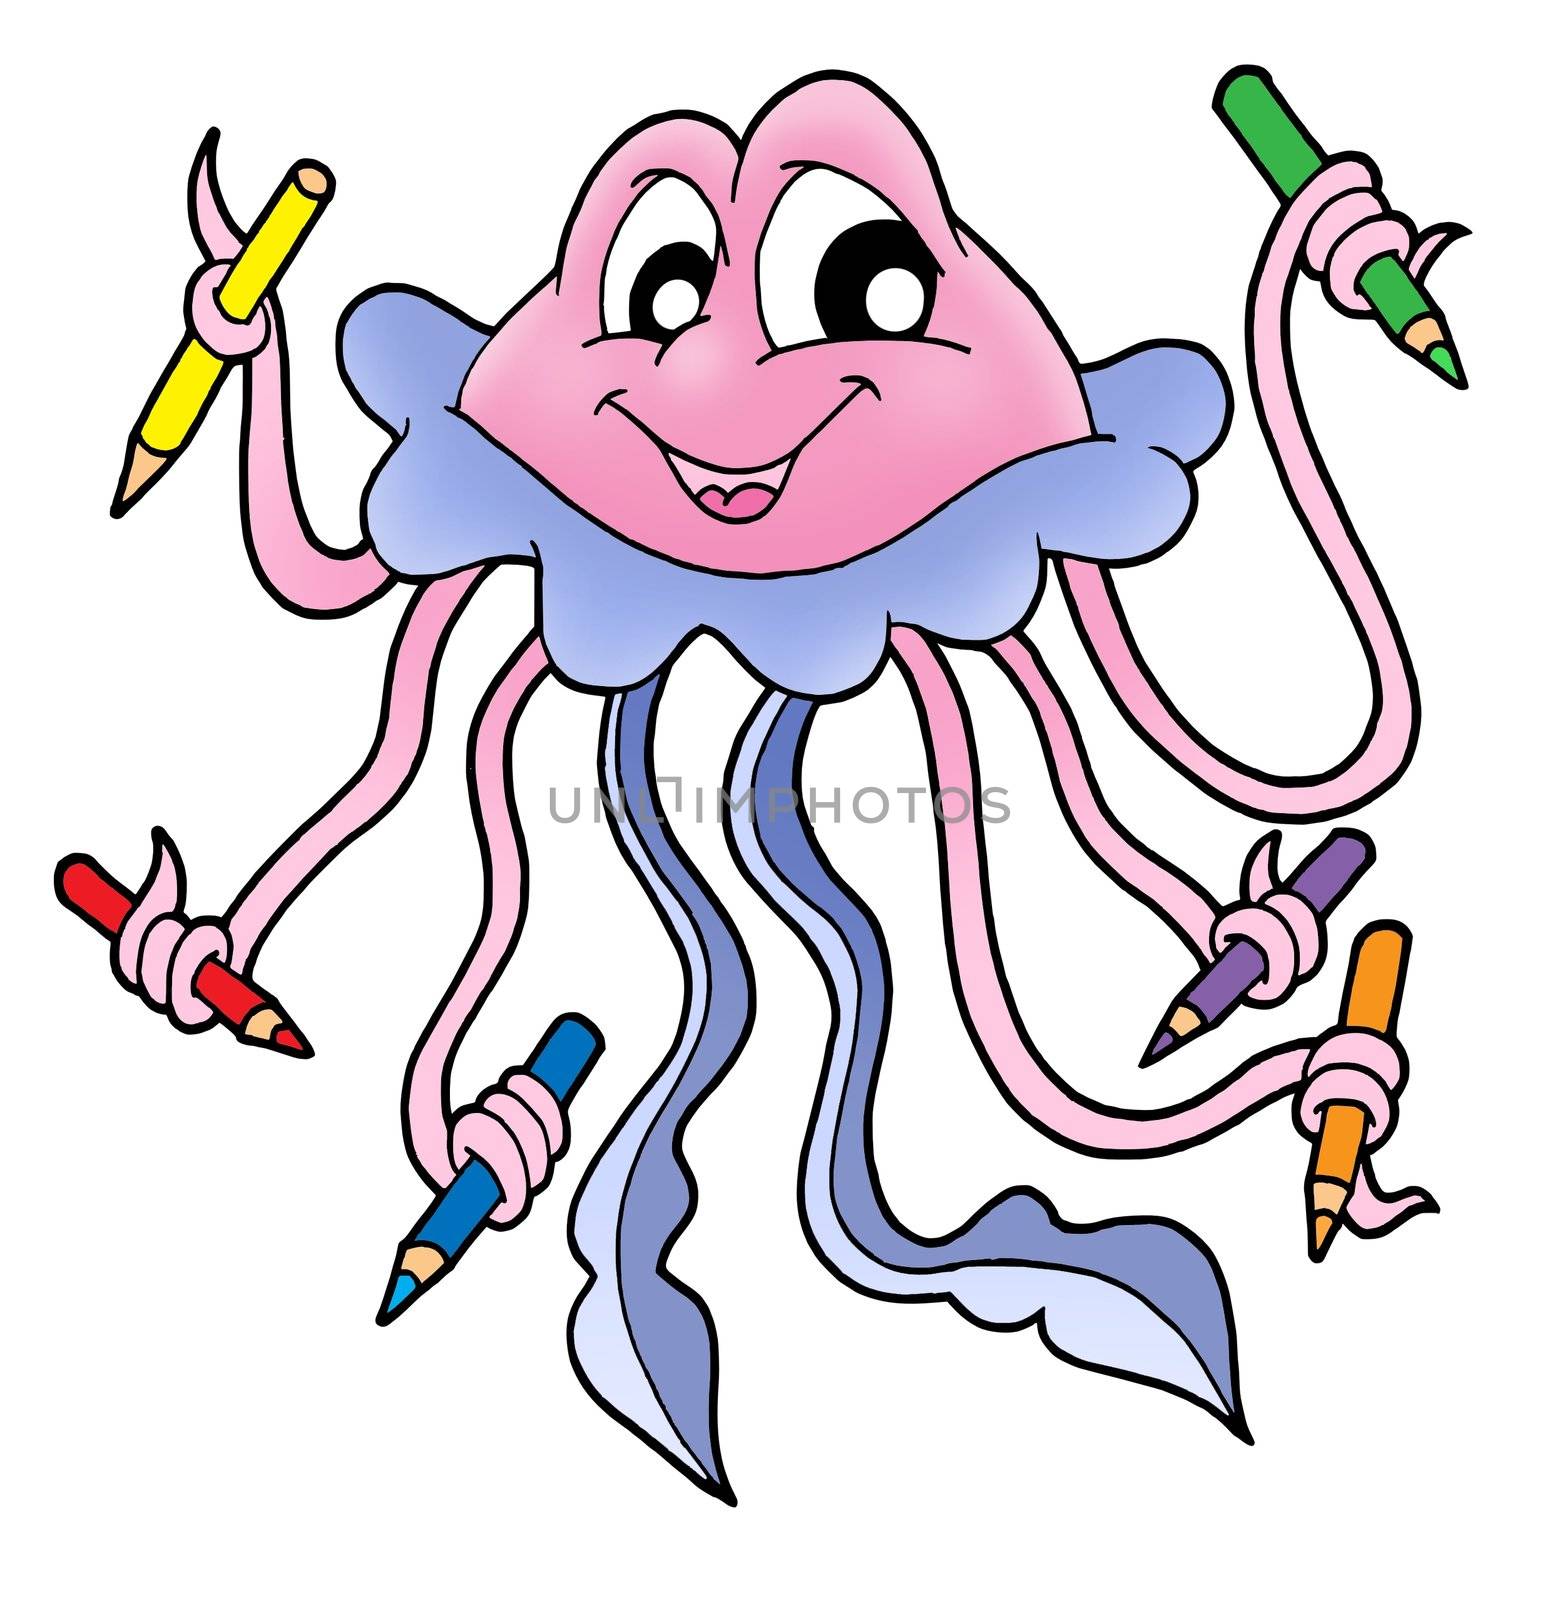 Jellyfish with crayons - color illustration